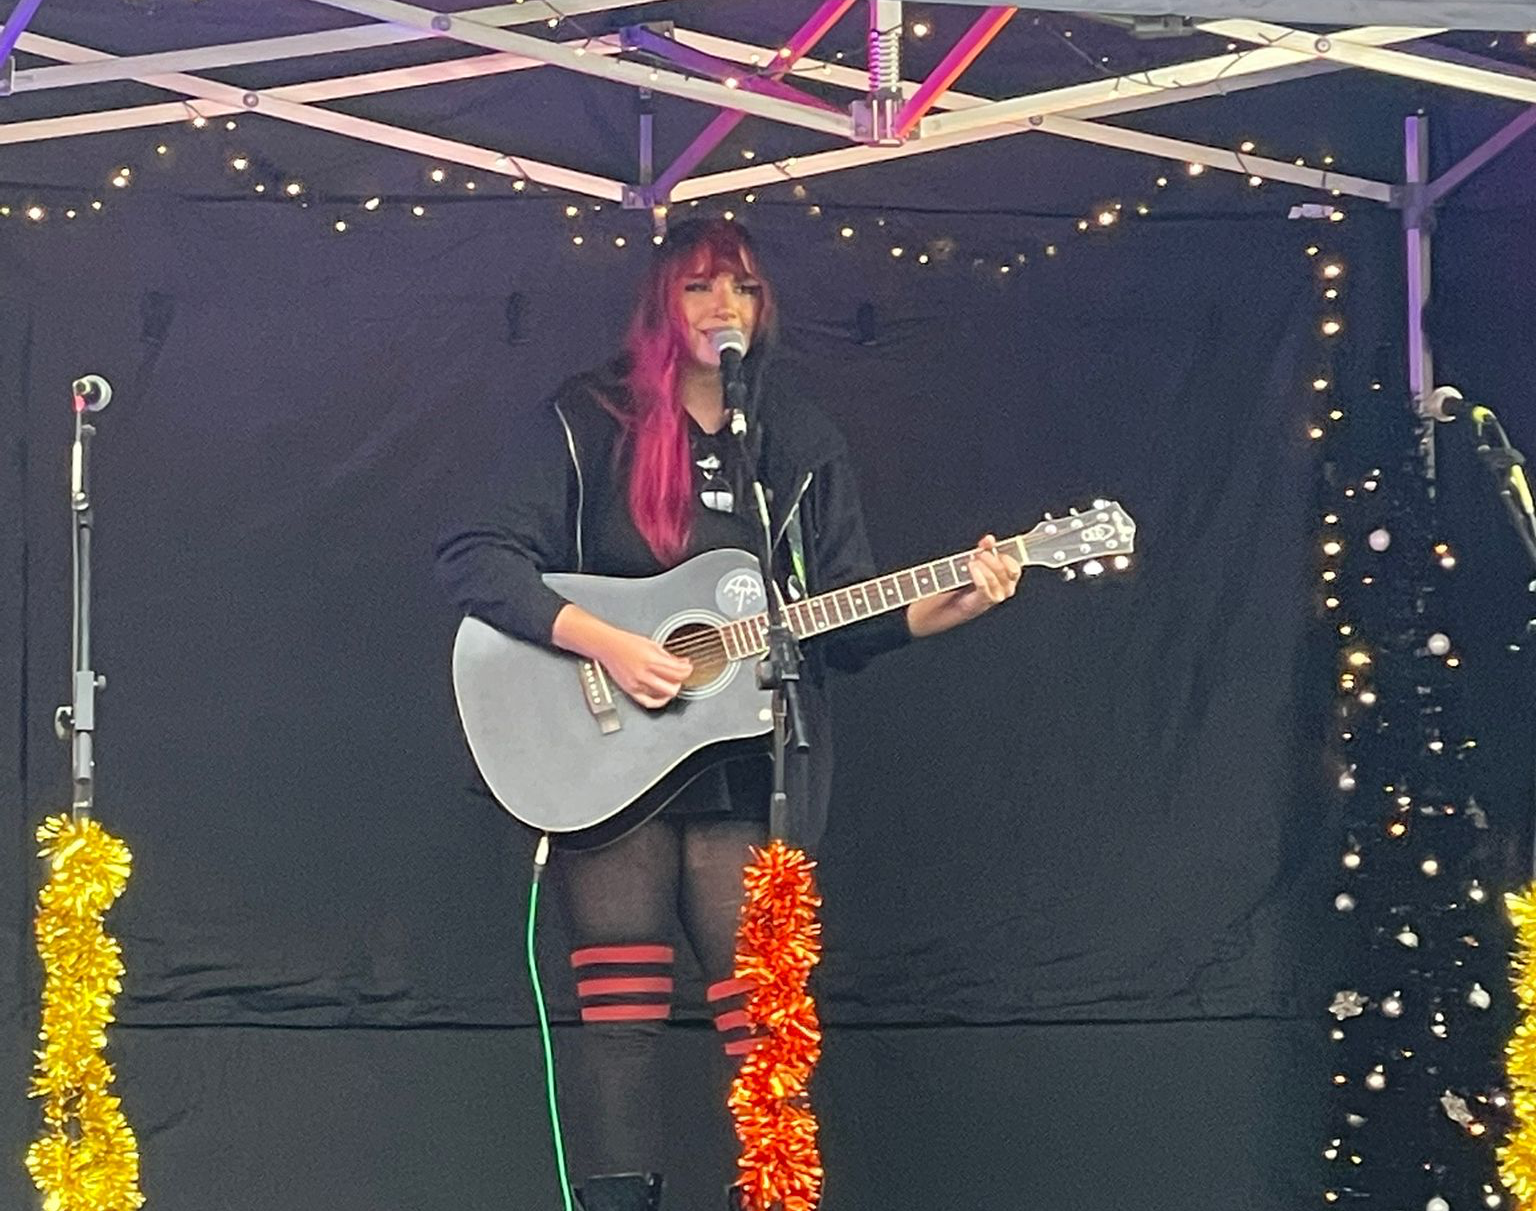 A girl with pink hair playing the guitar and singing on a modular stage at a community event